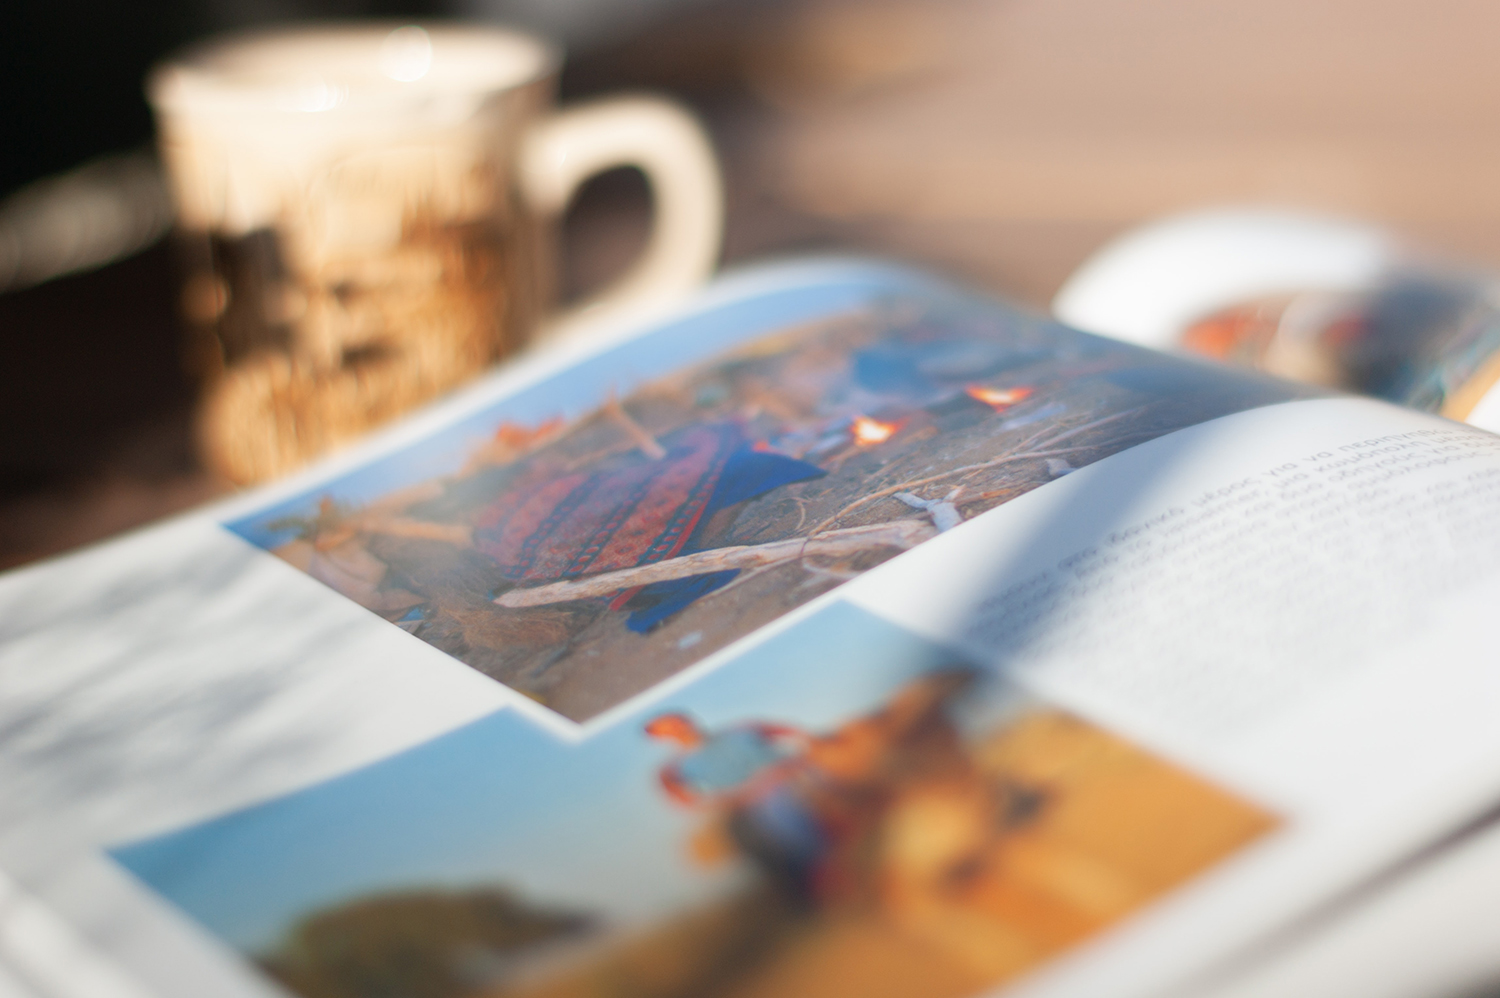 An open book on a table with a coffee mug nearby. The book displays colorful clothing and a picture of a person riding a camel, accompanied by text.